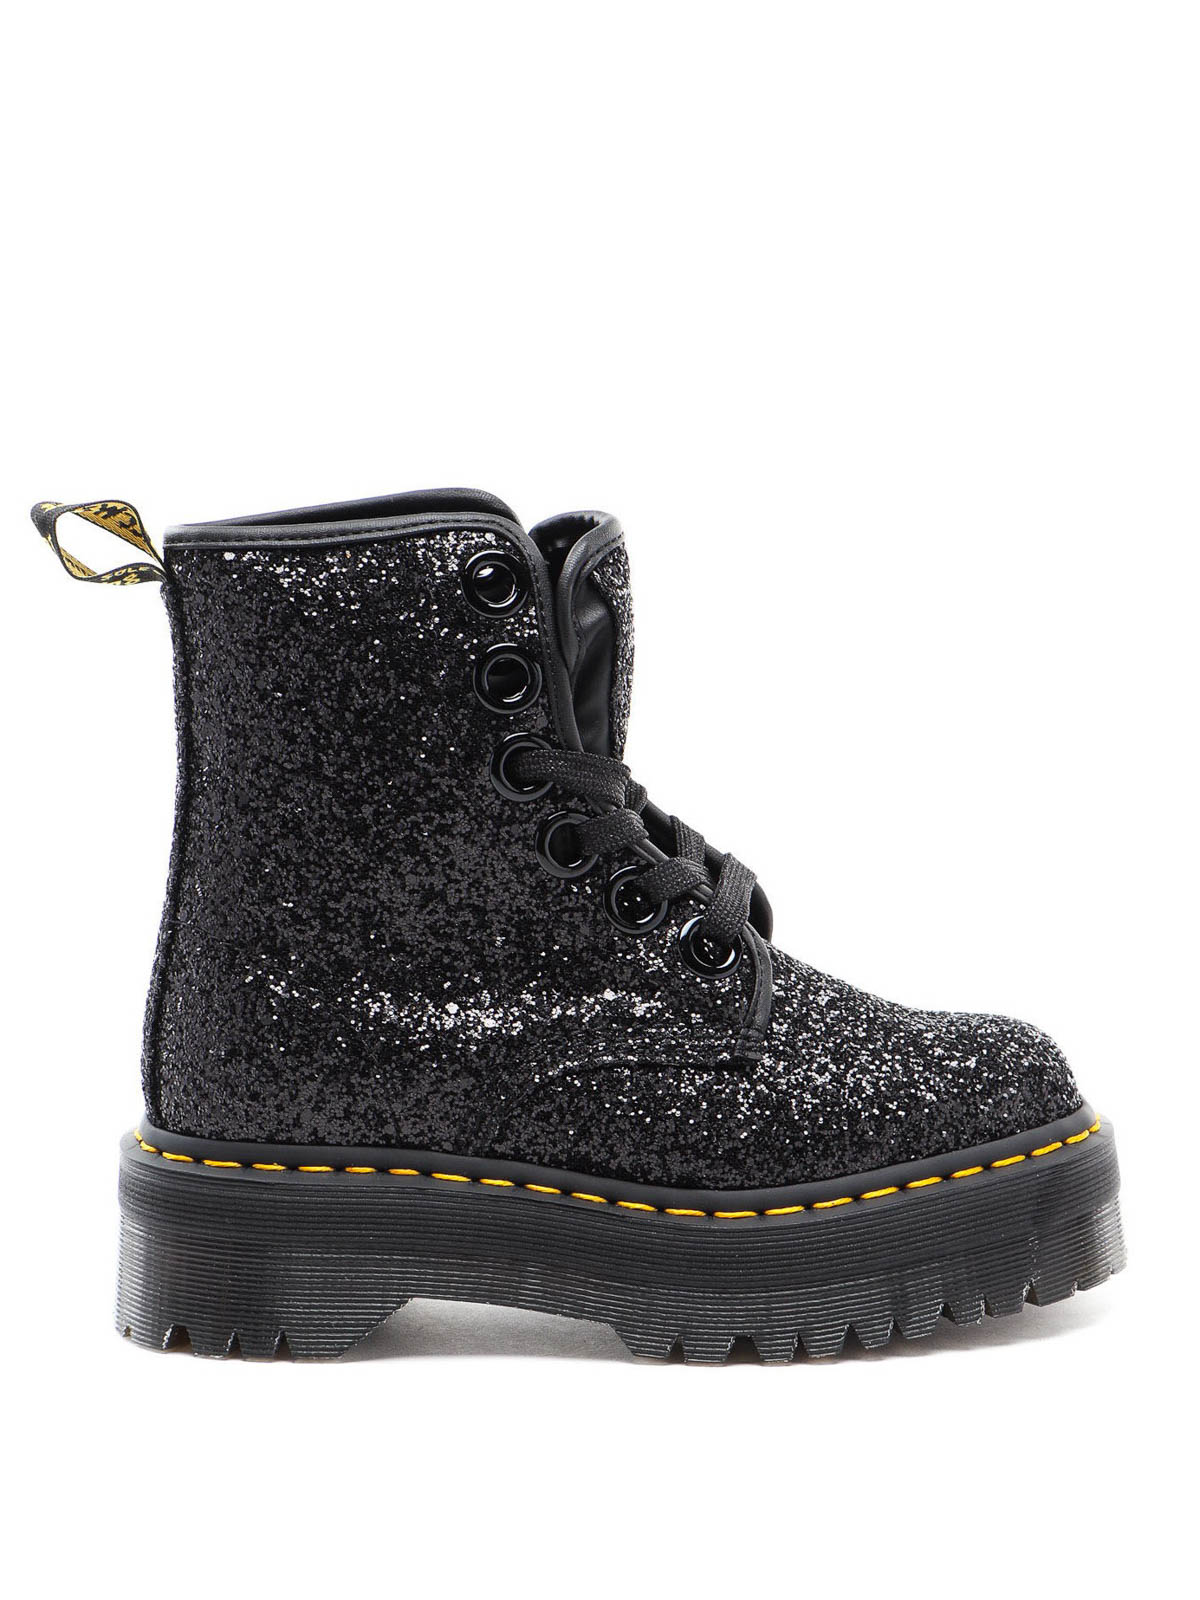 Dr. Martens - Molly Glitter booties 